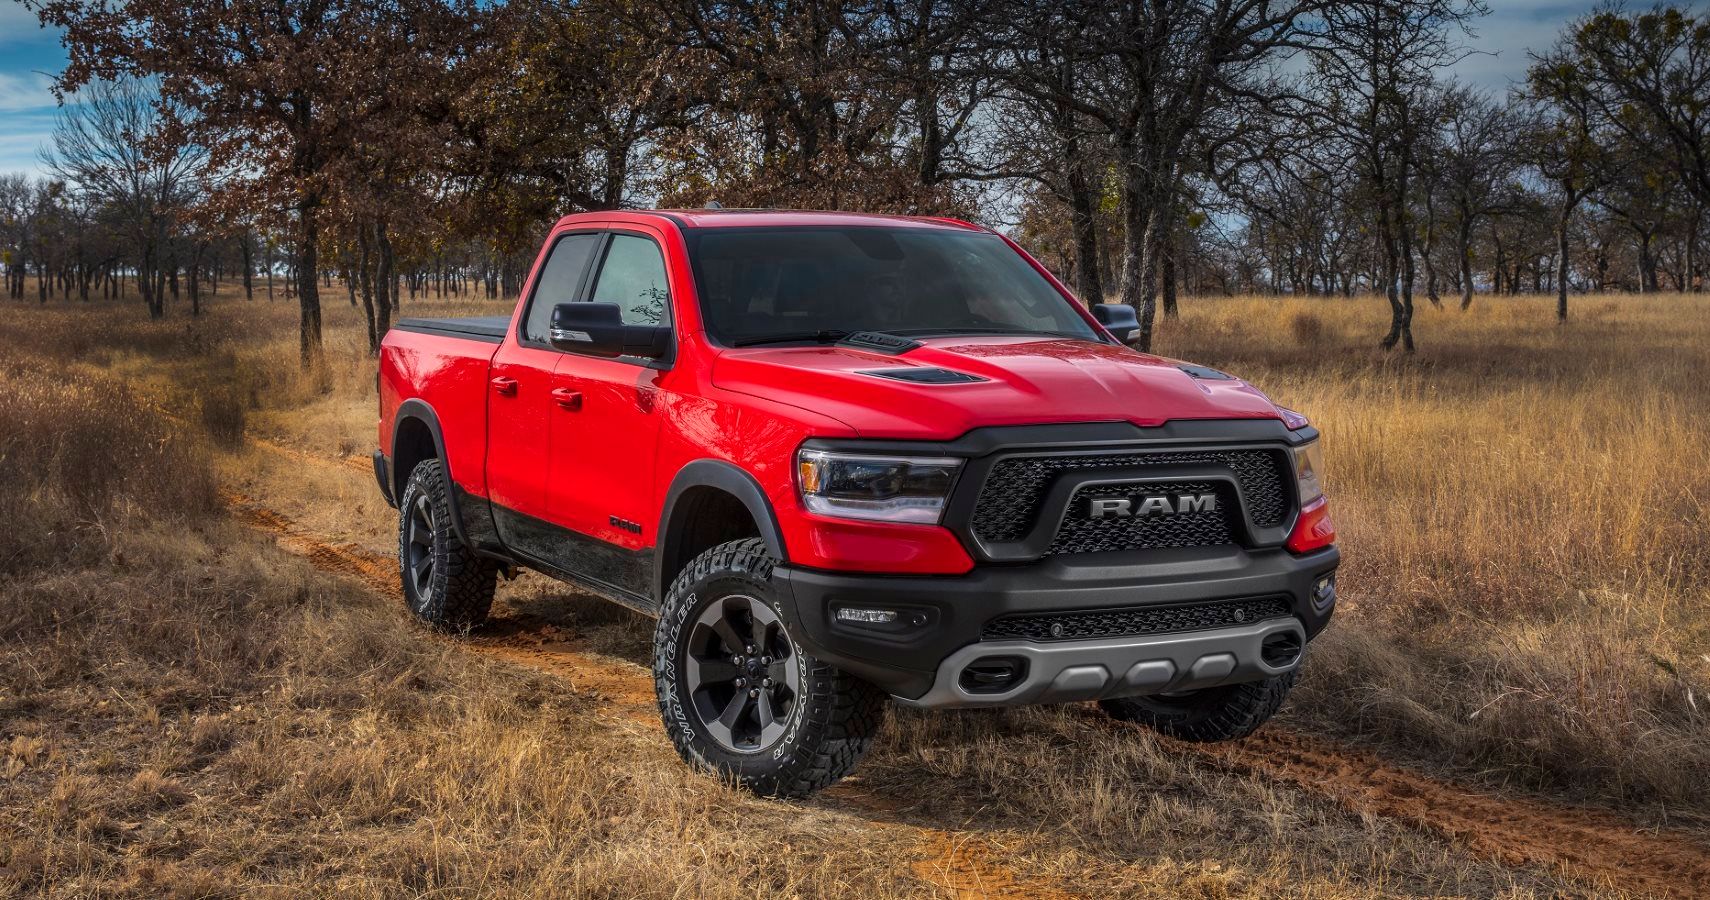 Ram EcoDiesel Is Here With 480 LbFt Torque And ClassLeading 12,560Lb